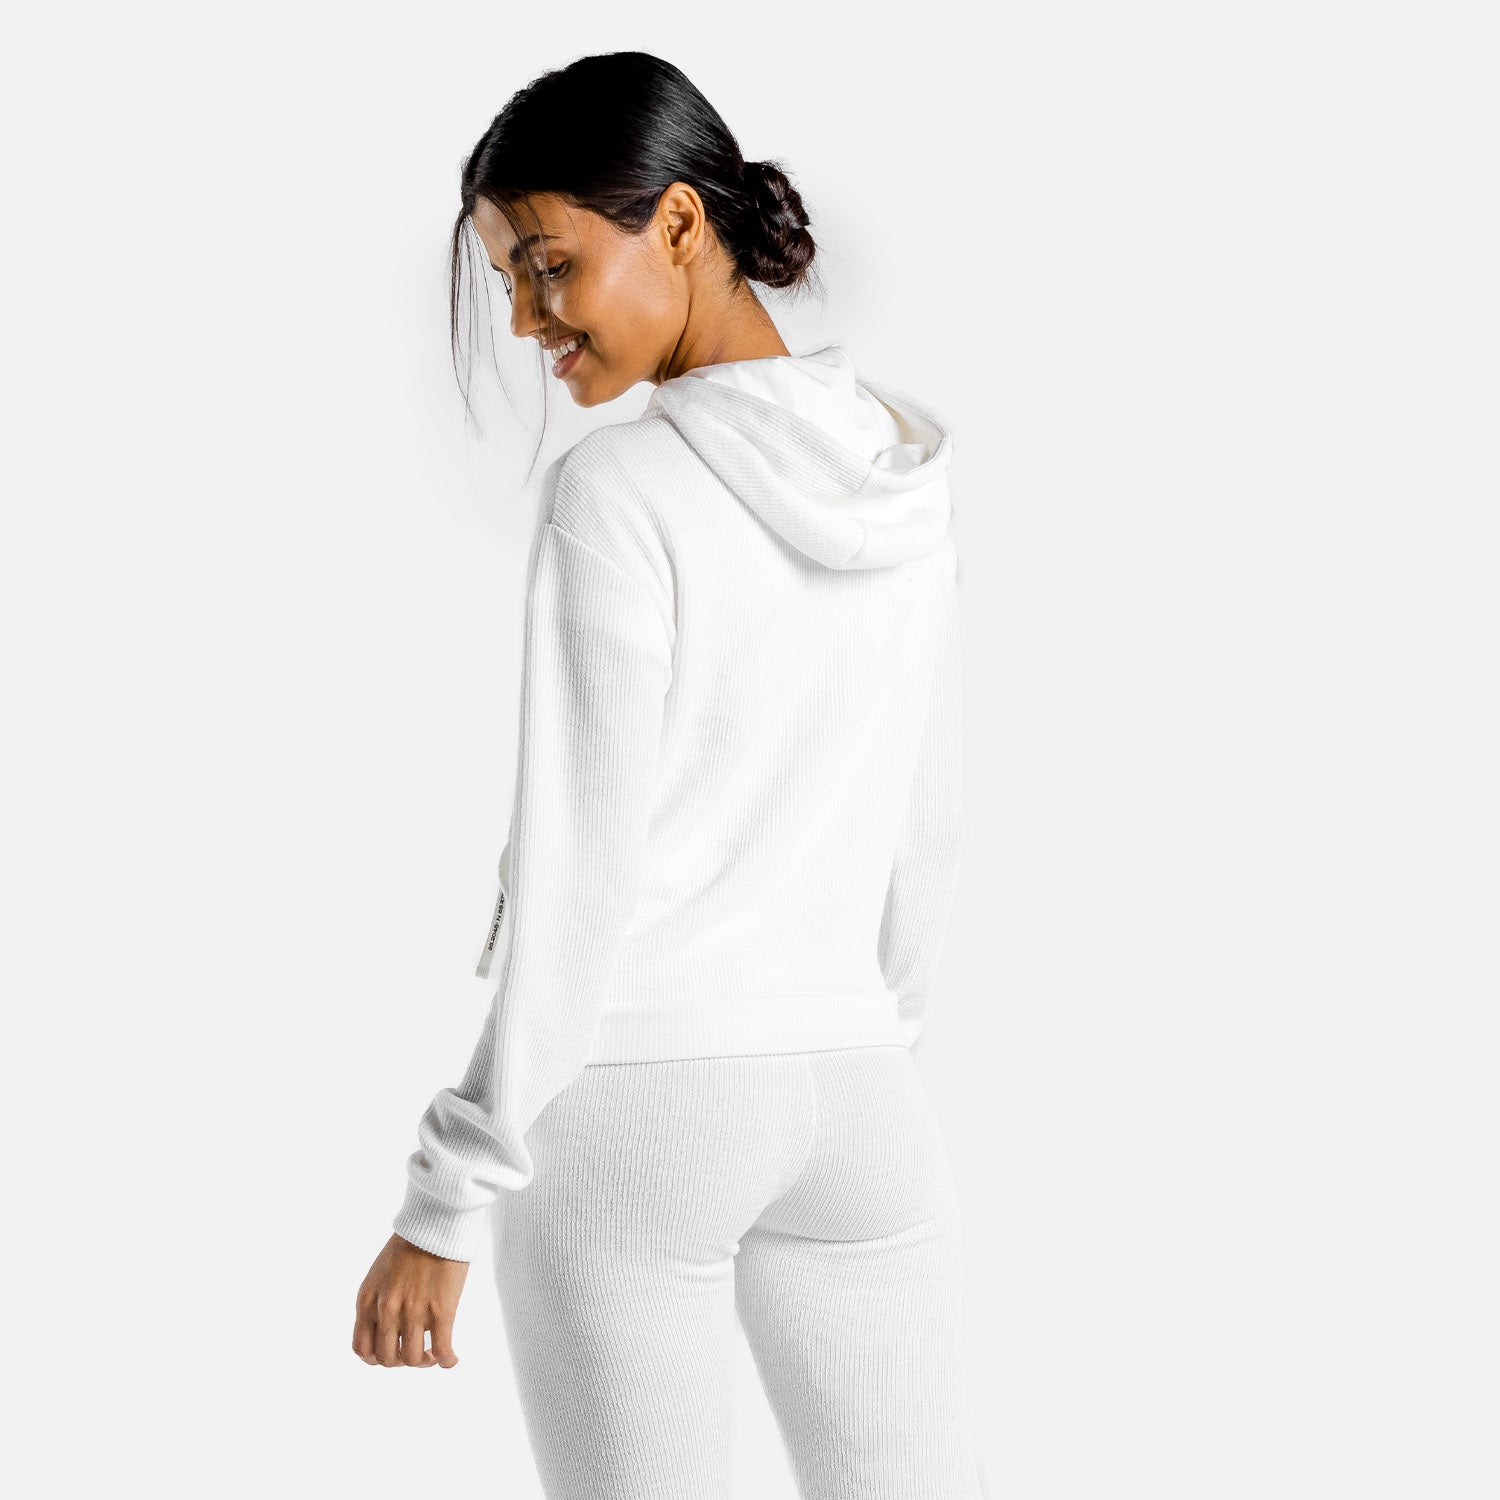 squatwolf-gym-hoodies-women-luxe-zip-up-white-workout-clothes